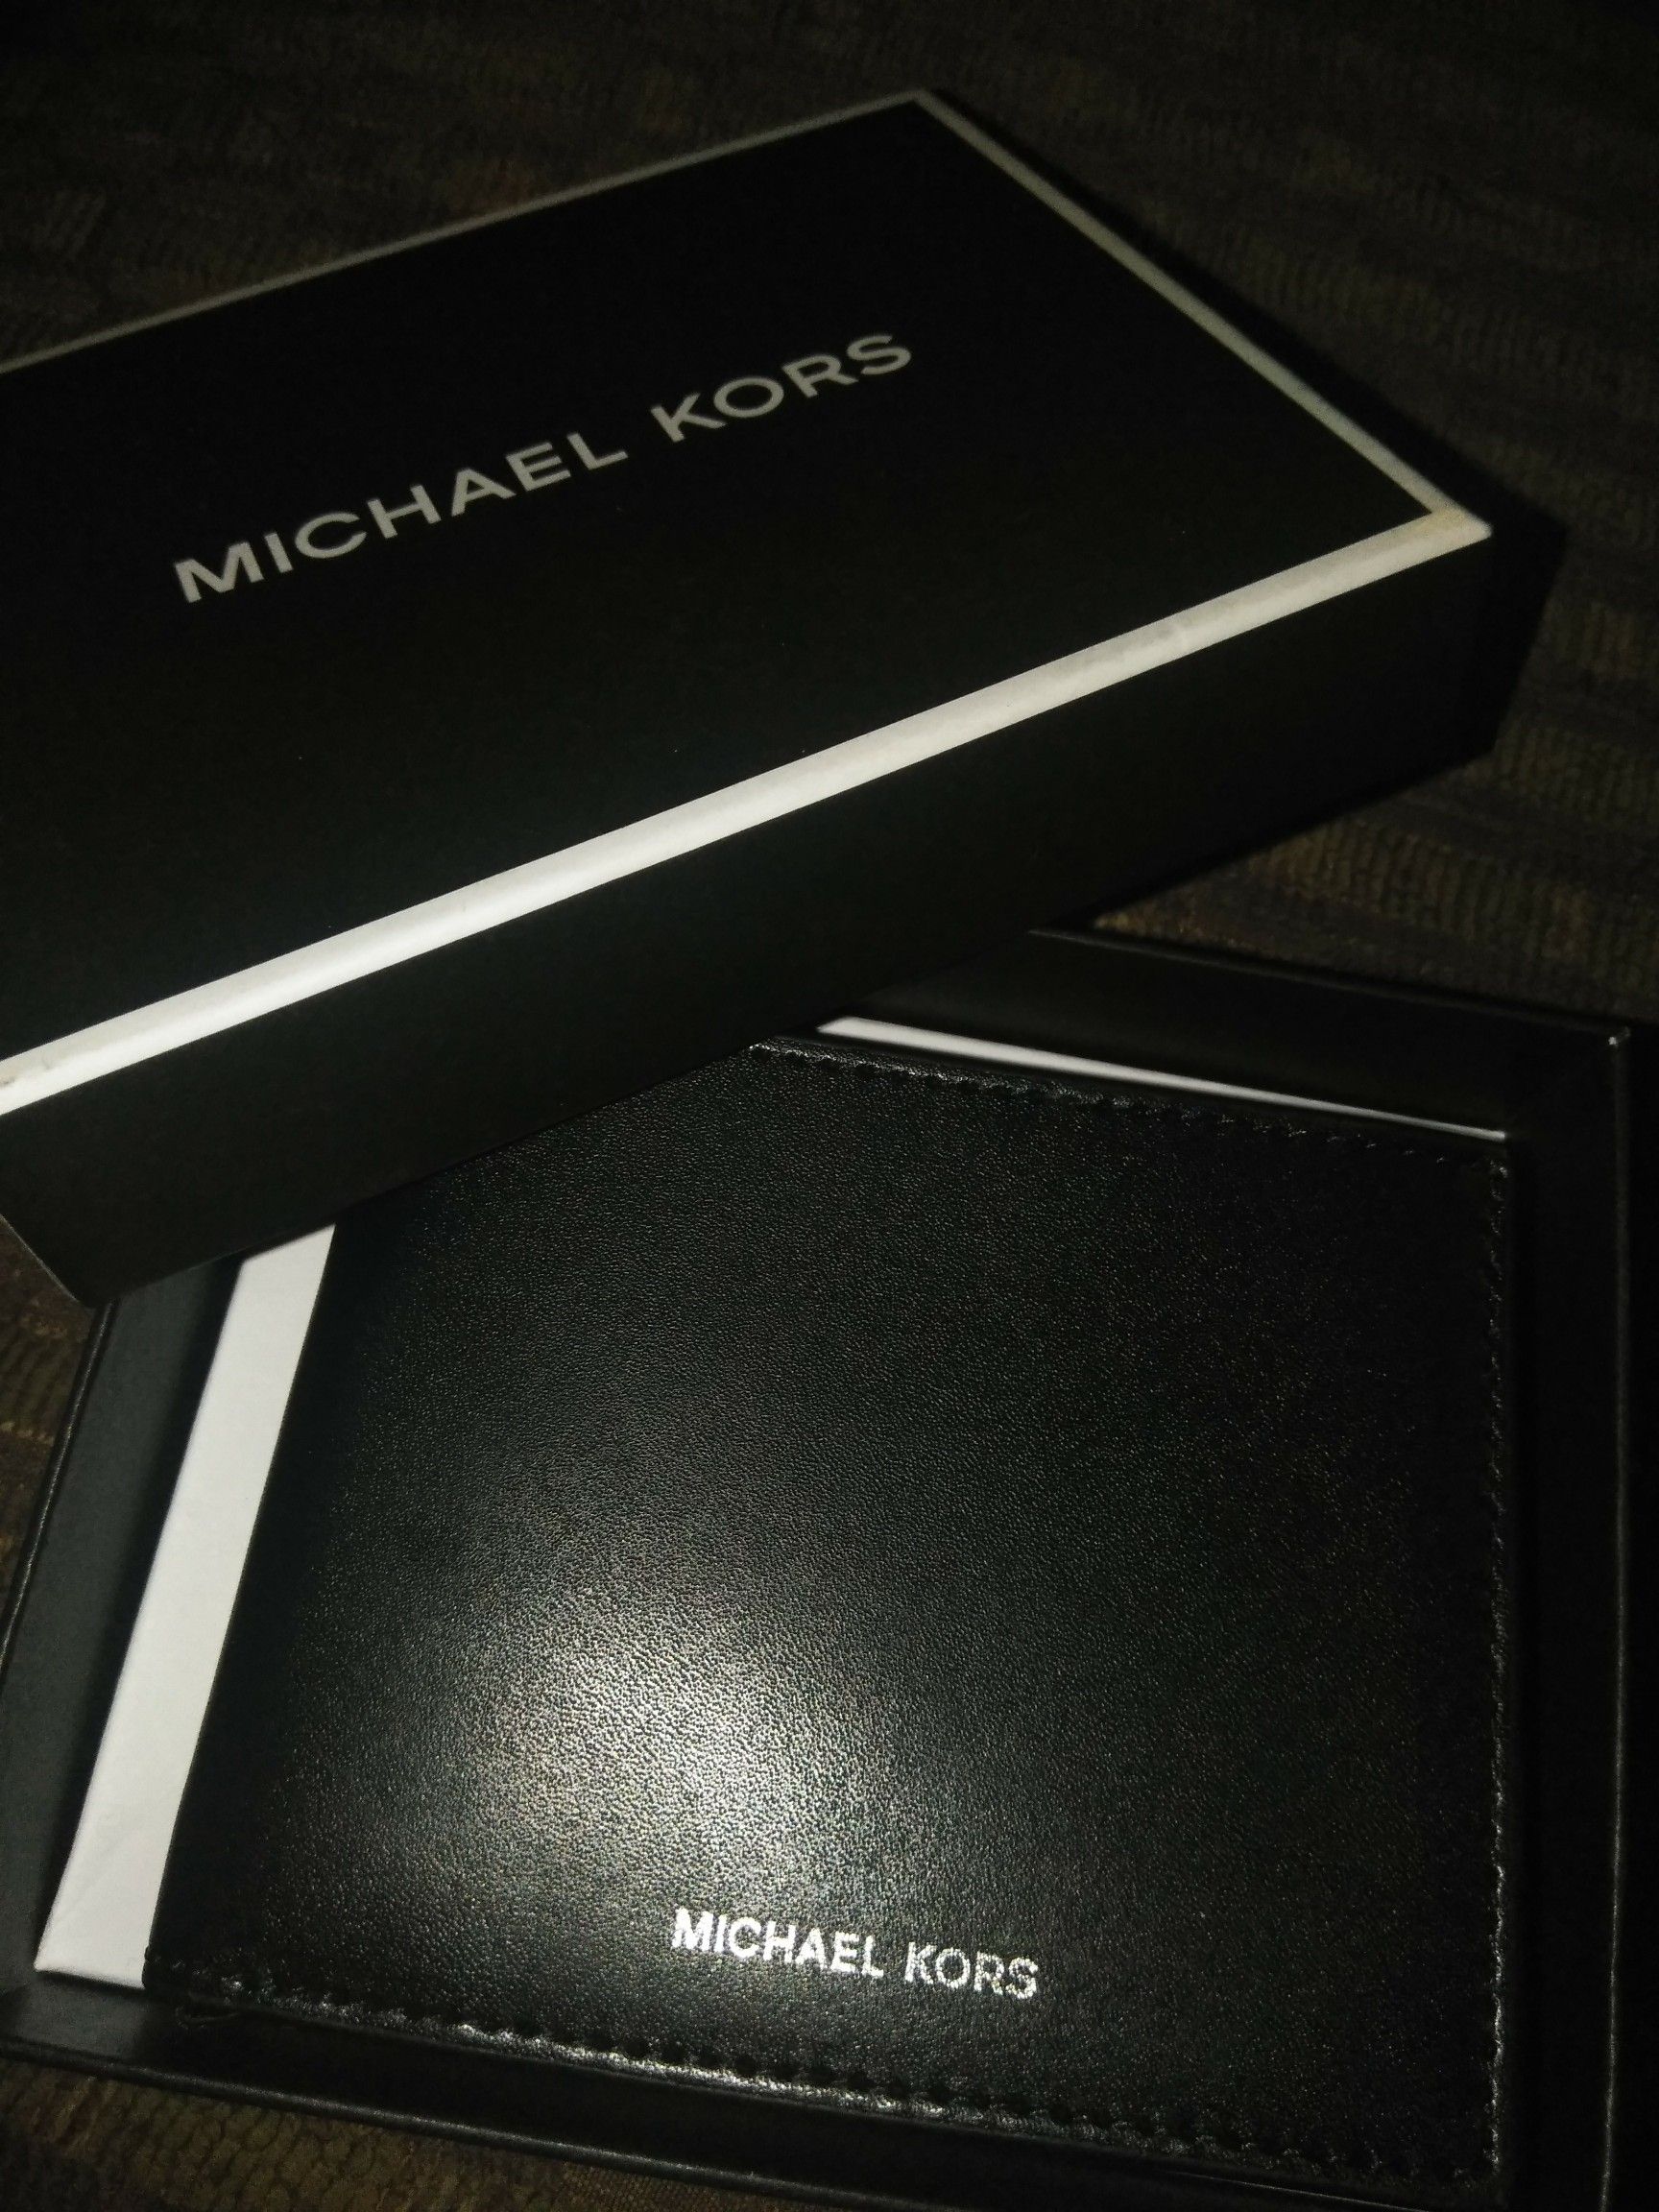 MICHAEL KORS MENS BRAND NEW WALLET IN BOX NEVER USED